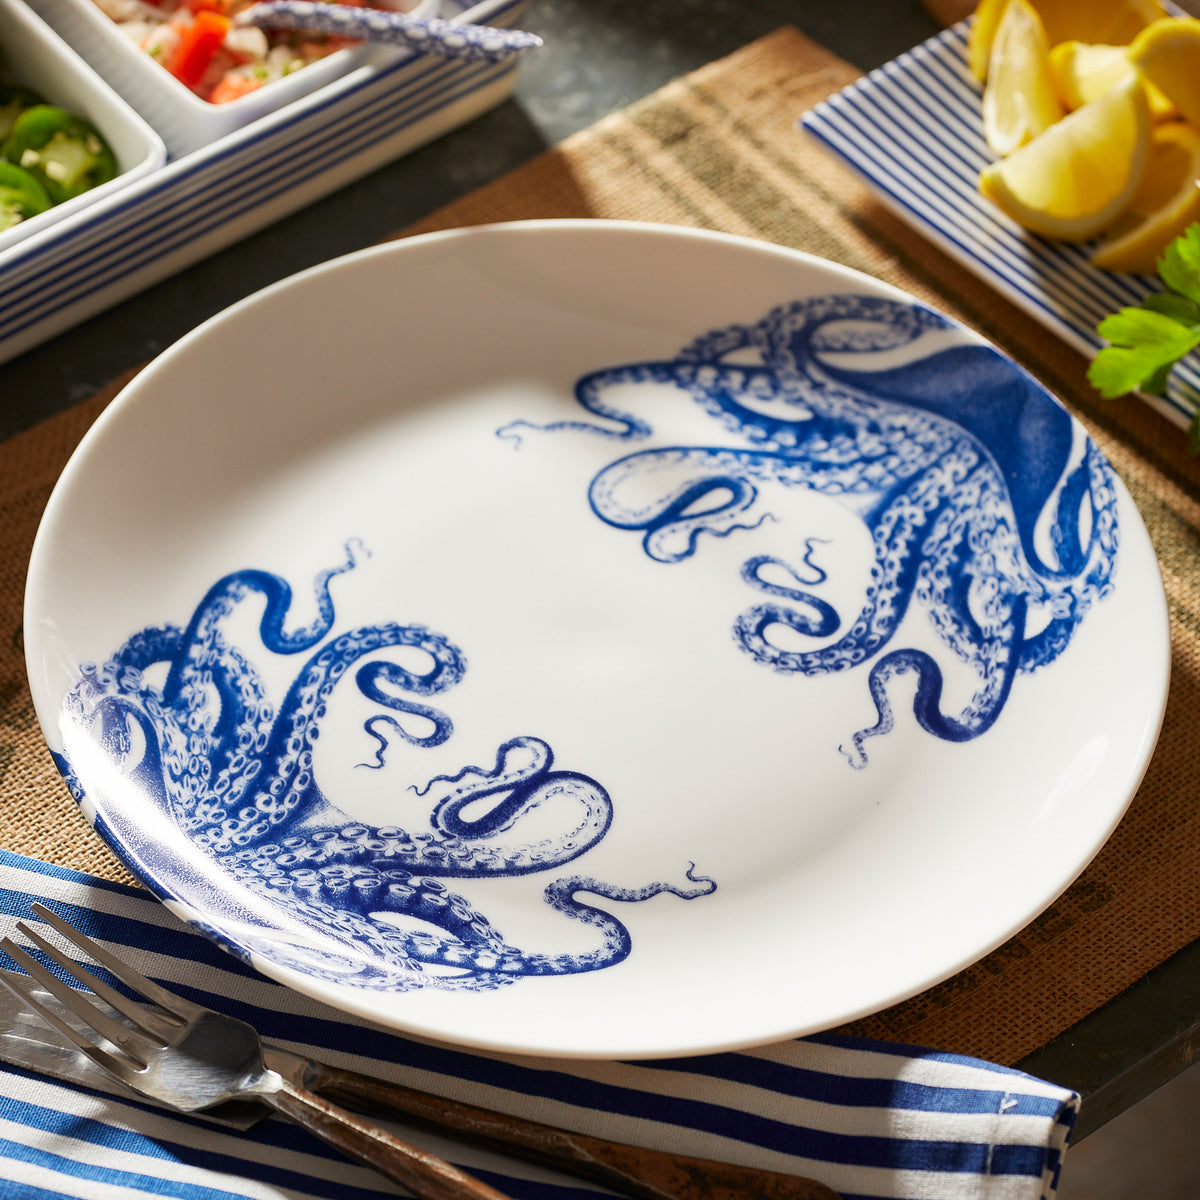 A creamy white premium porcelain Lucy Coupe Dinner Plate by Caskata Artisanal Home features blue octopus tentacles on two sides, placed on a brown placemat alongside a silver fork, knife, and a blue striped napkin. Background includes lemon slices and a portion of food in a dish—meet Lucy the octopus!